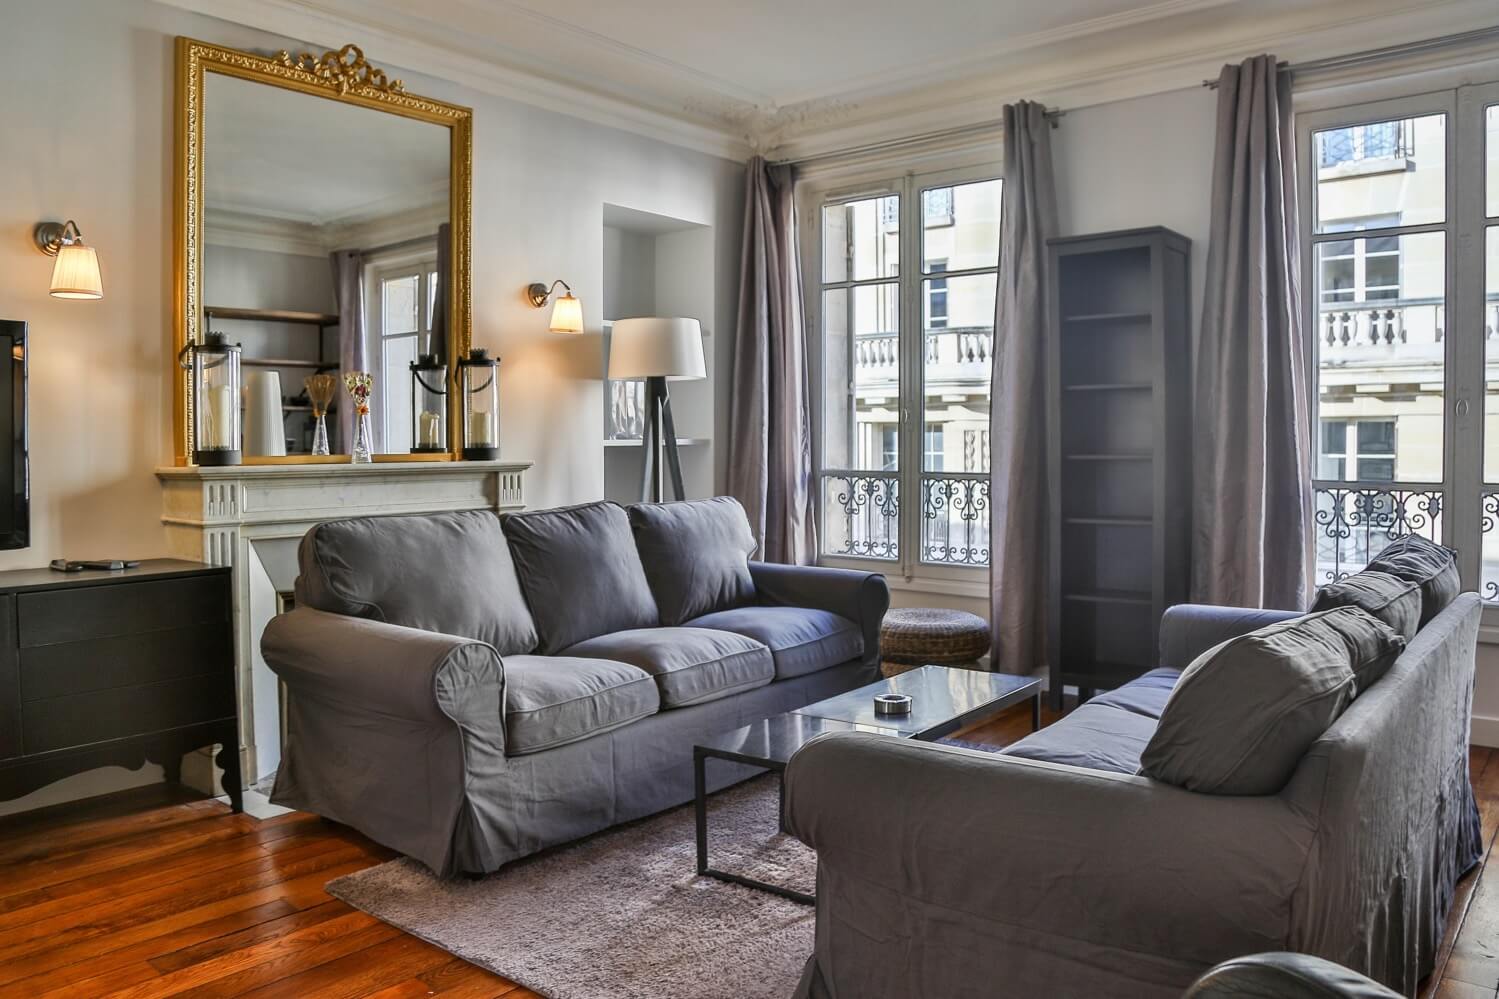 Furnished apartment with 3 bedrooms in Neuilly-sur-Seine (Rue Théophile Gautier) for rent long term